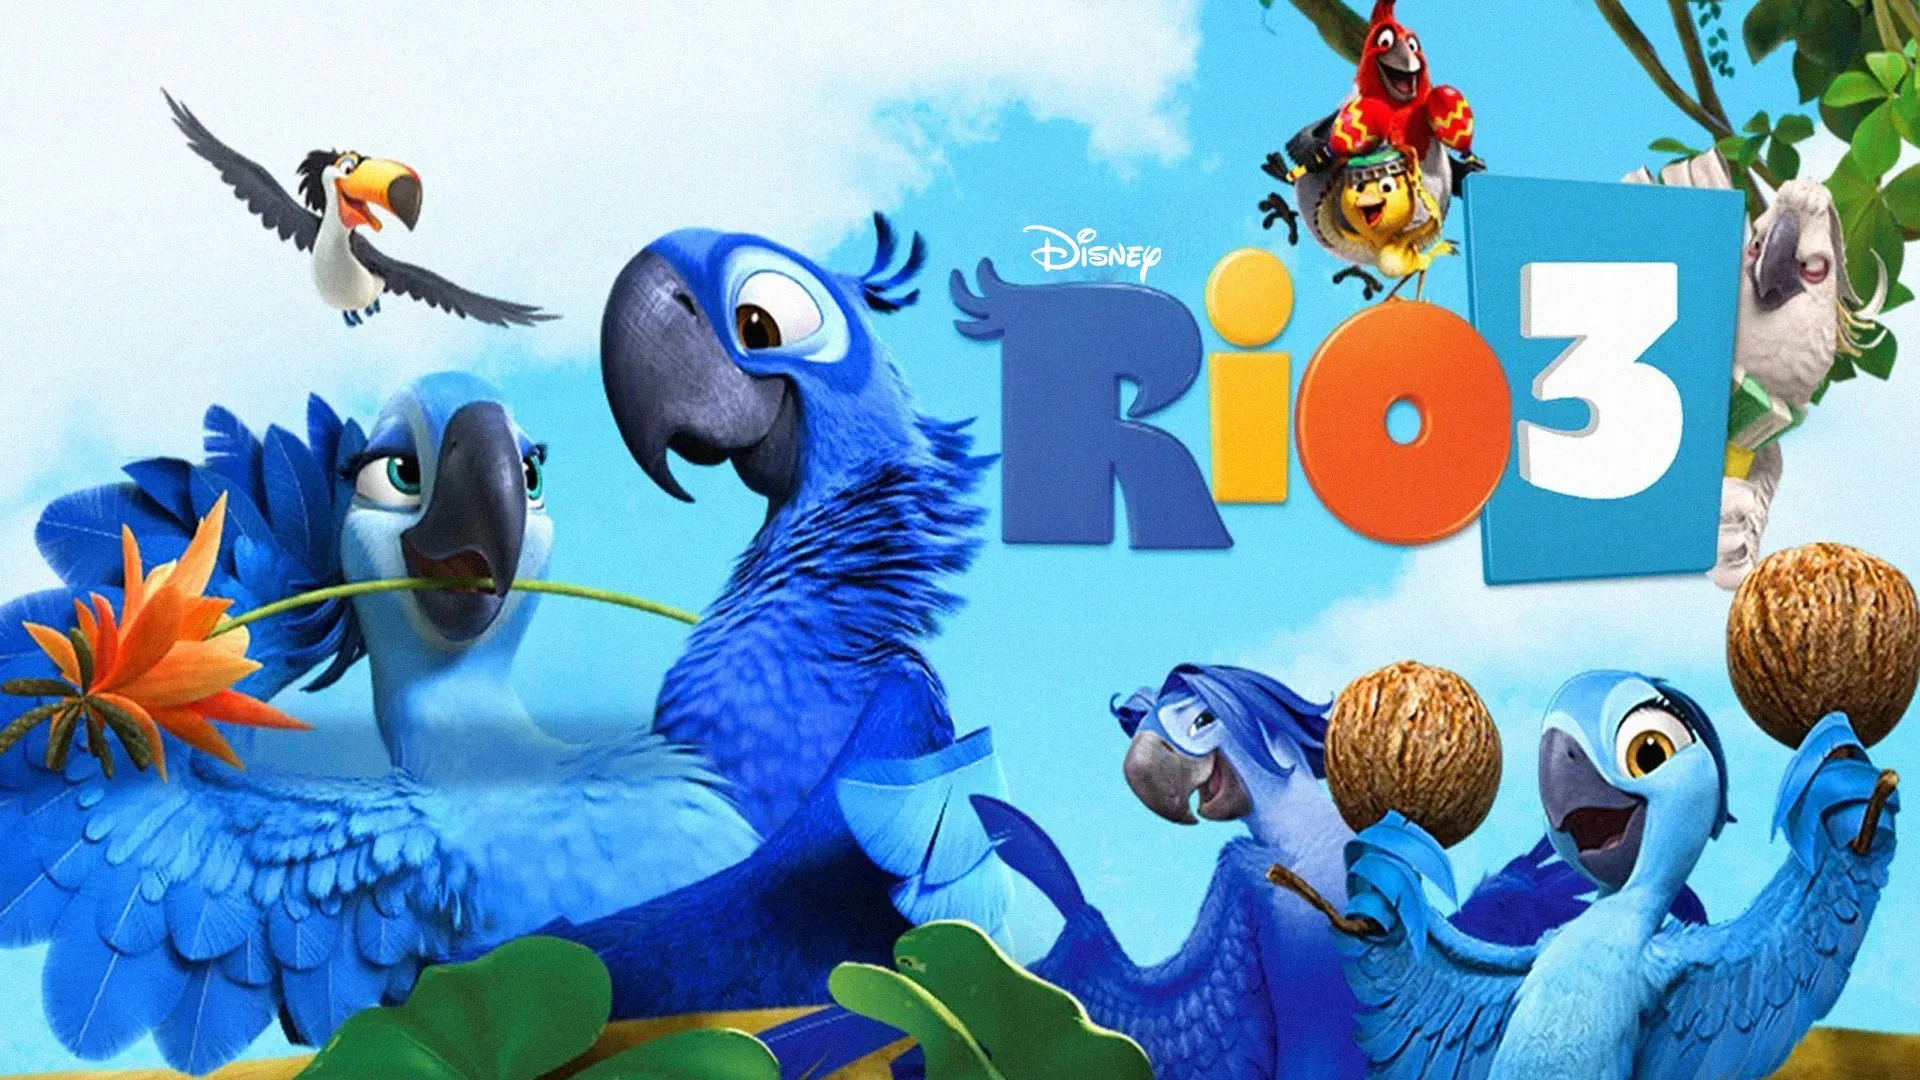 What Will Rio 3 Be About